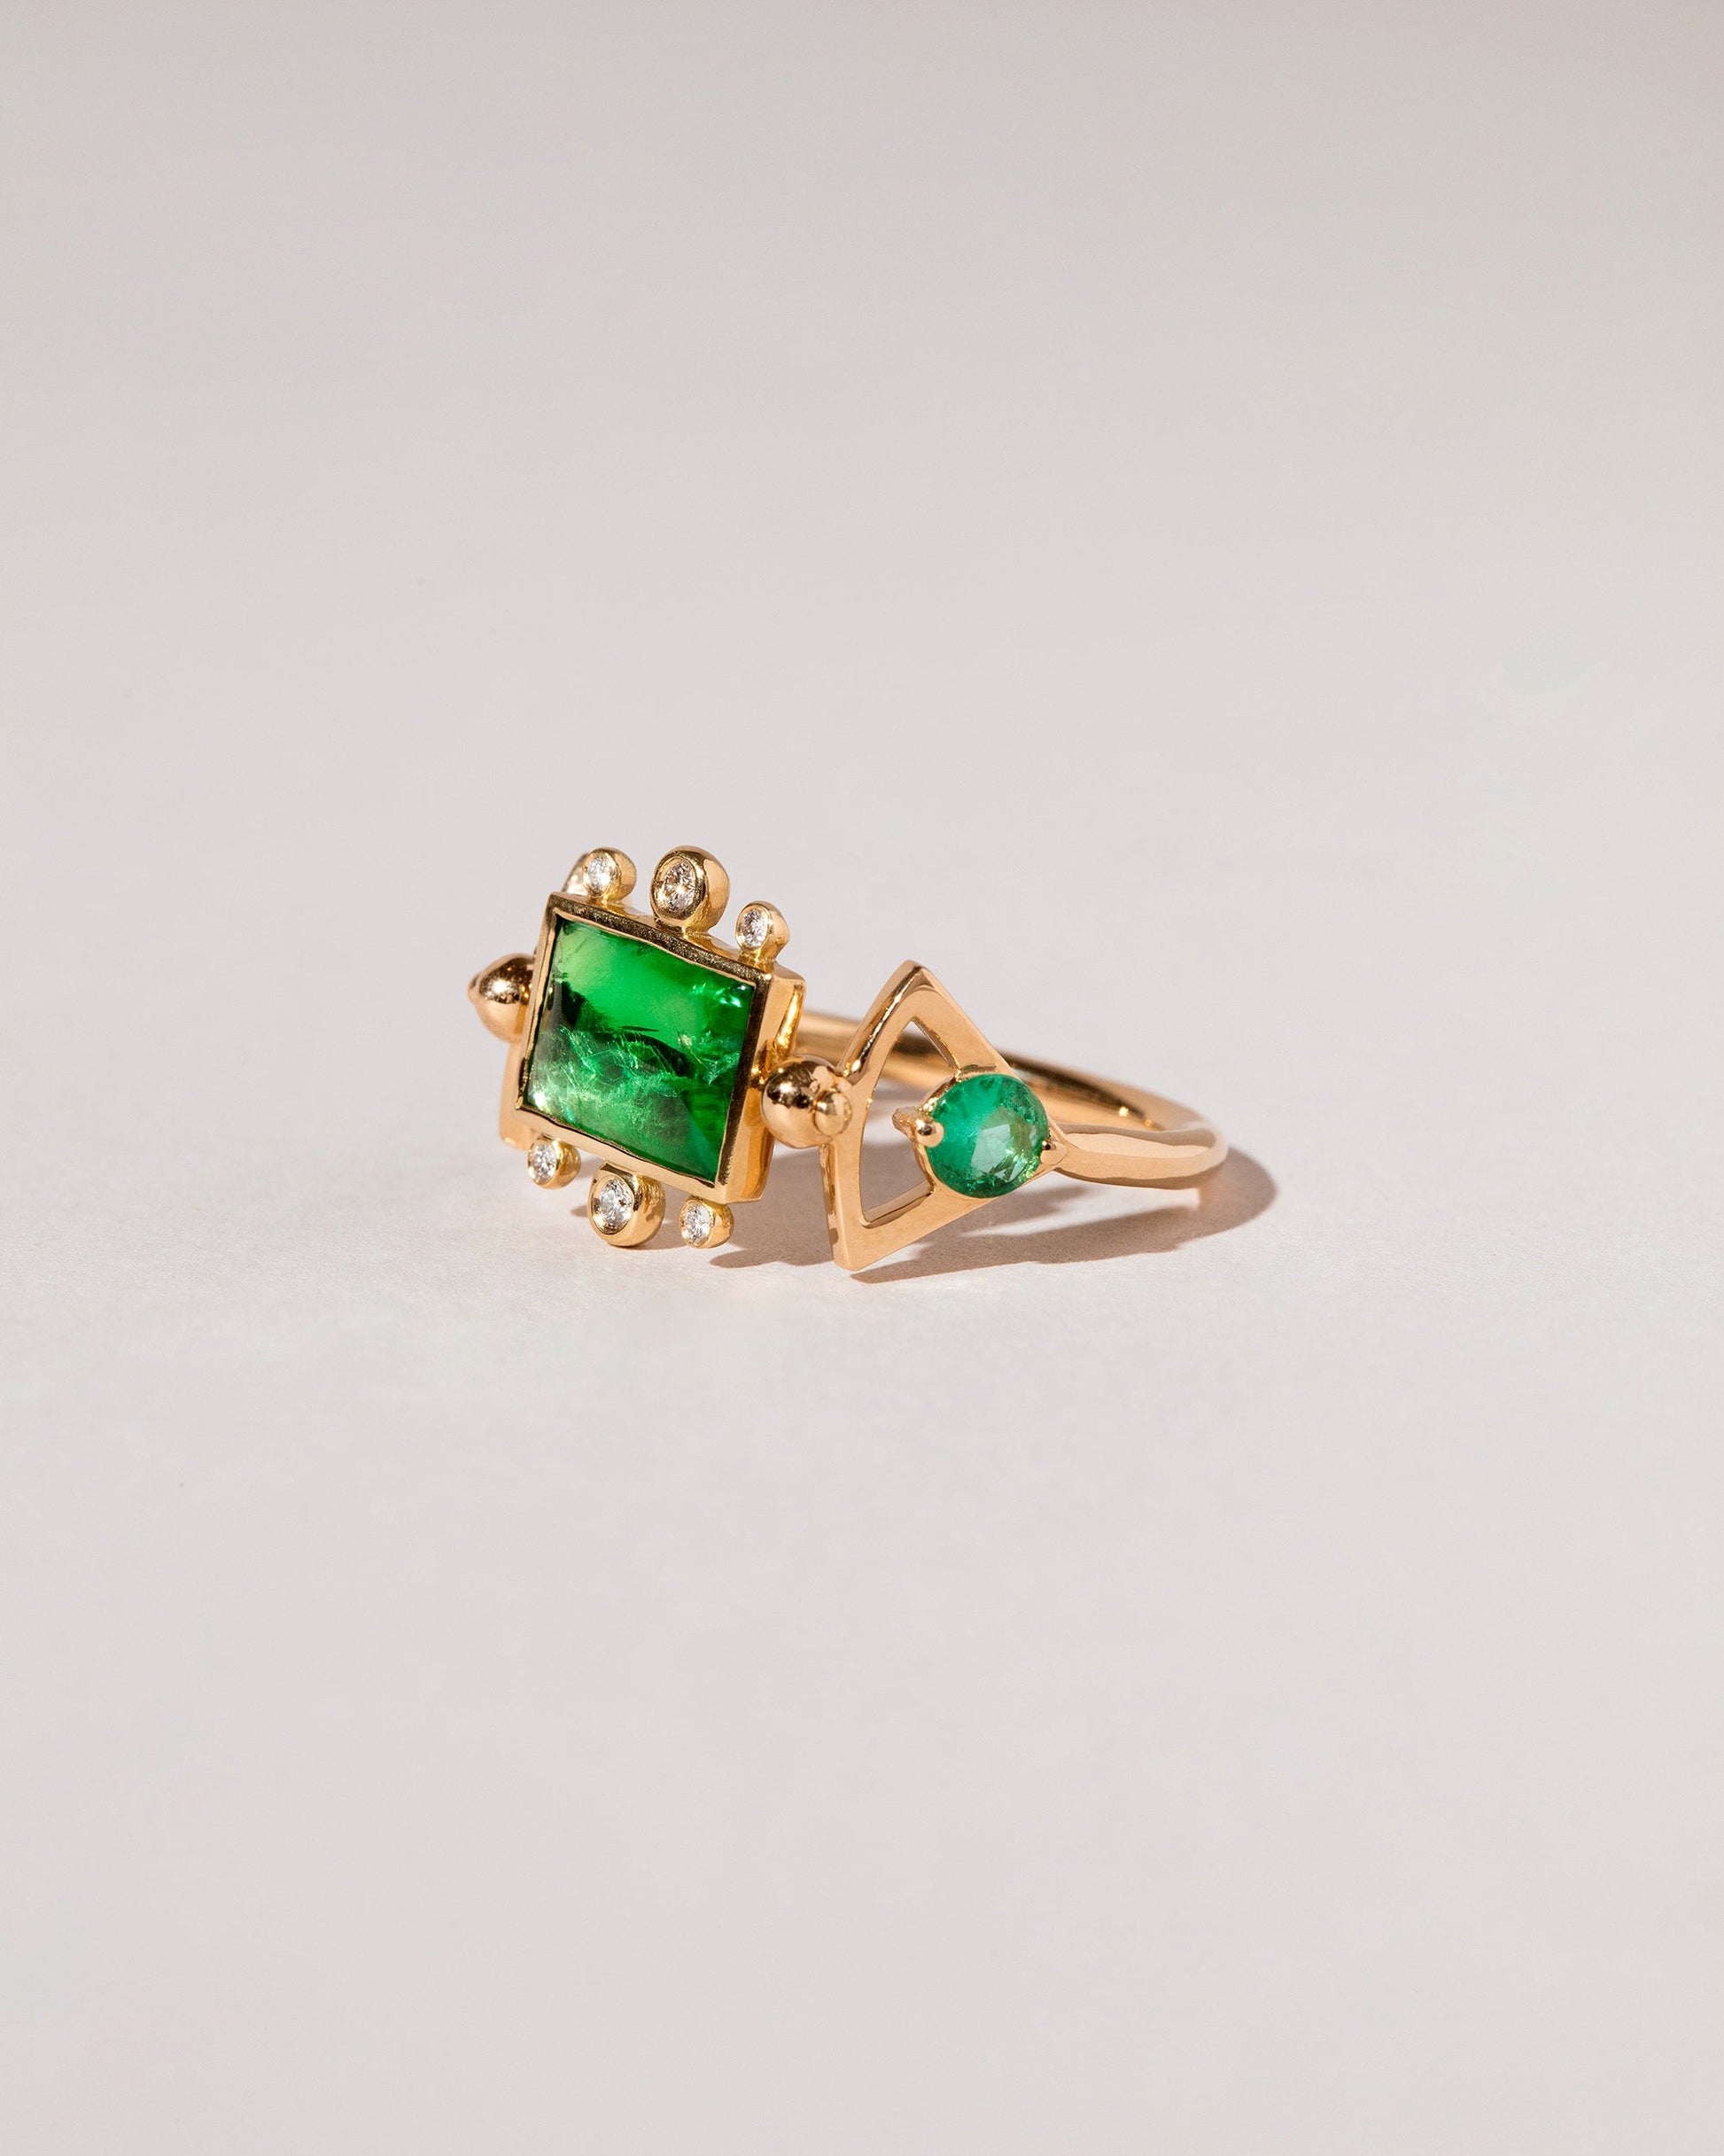  Emerald Lotus Ring on light color background.